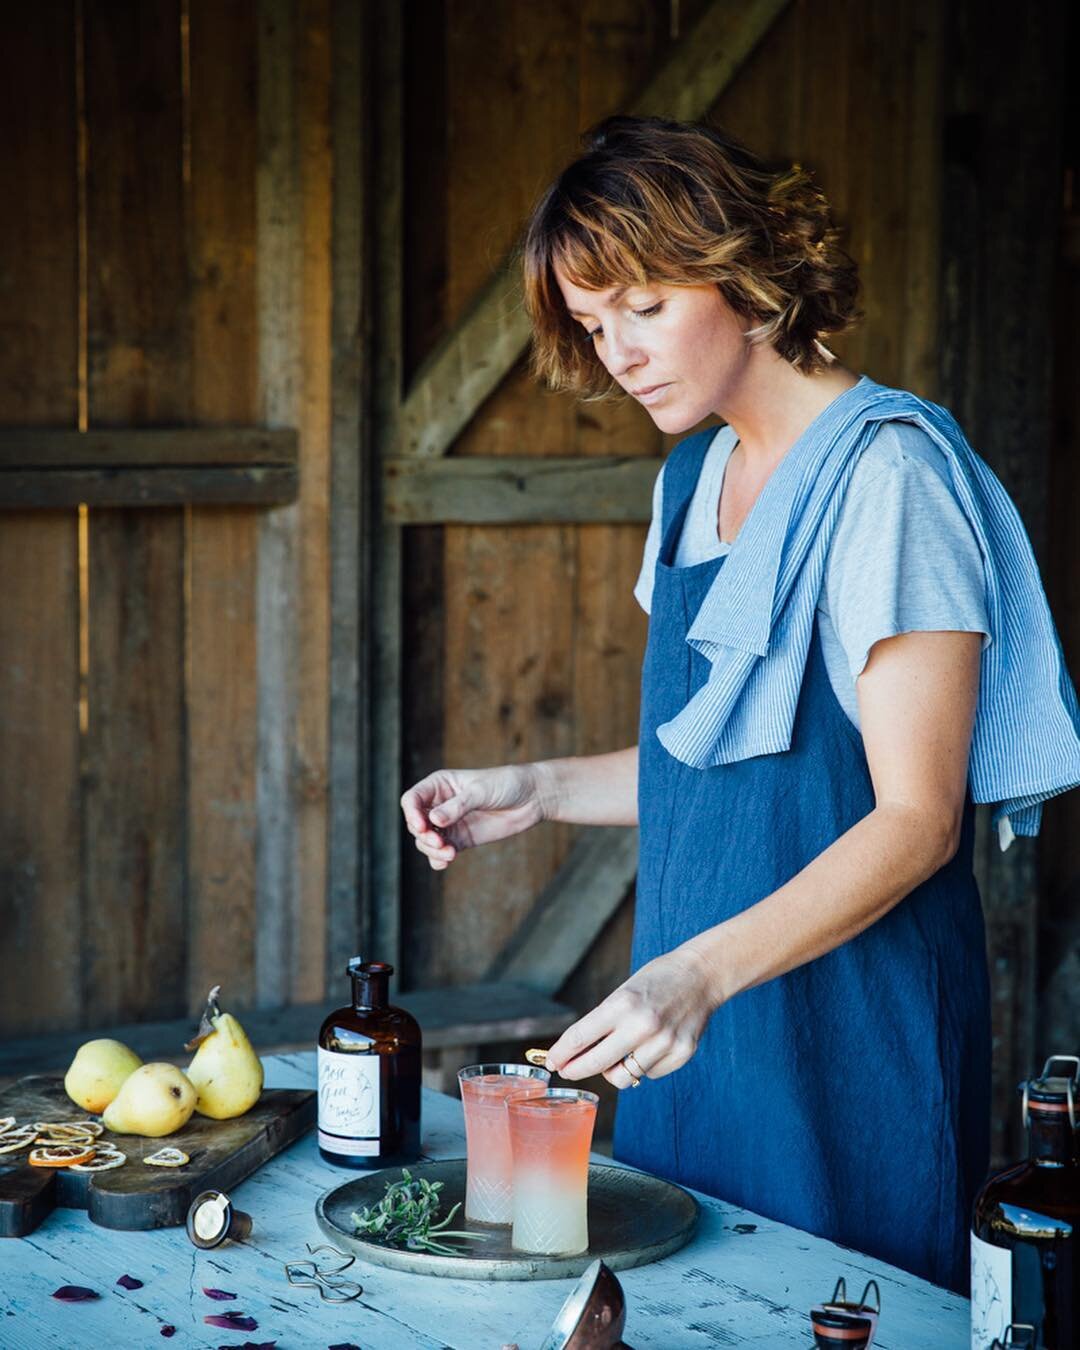 I have much to thank this lovely lady for, not least for introducing me to the hangover-free delights of organic gin. Feature out in @olivemagazine next month. @tinkture. Thanks also to @nancarrowfarm for the beautiful location. I do hope the chicken